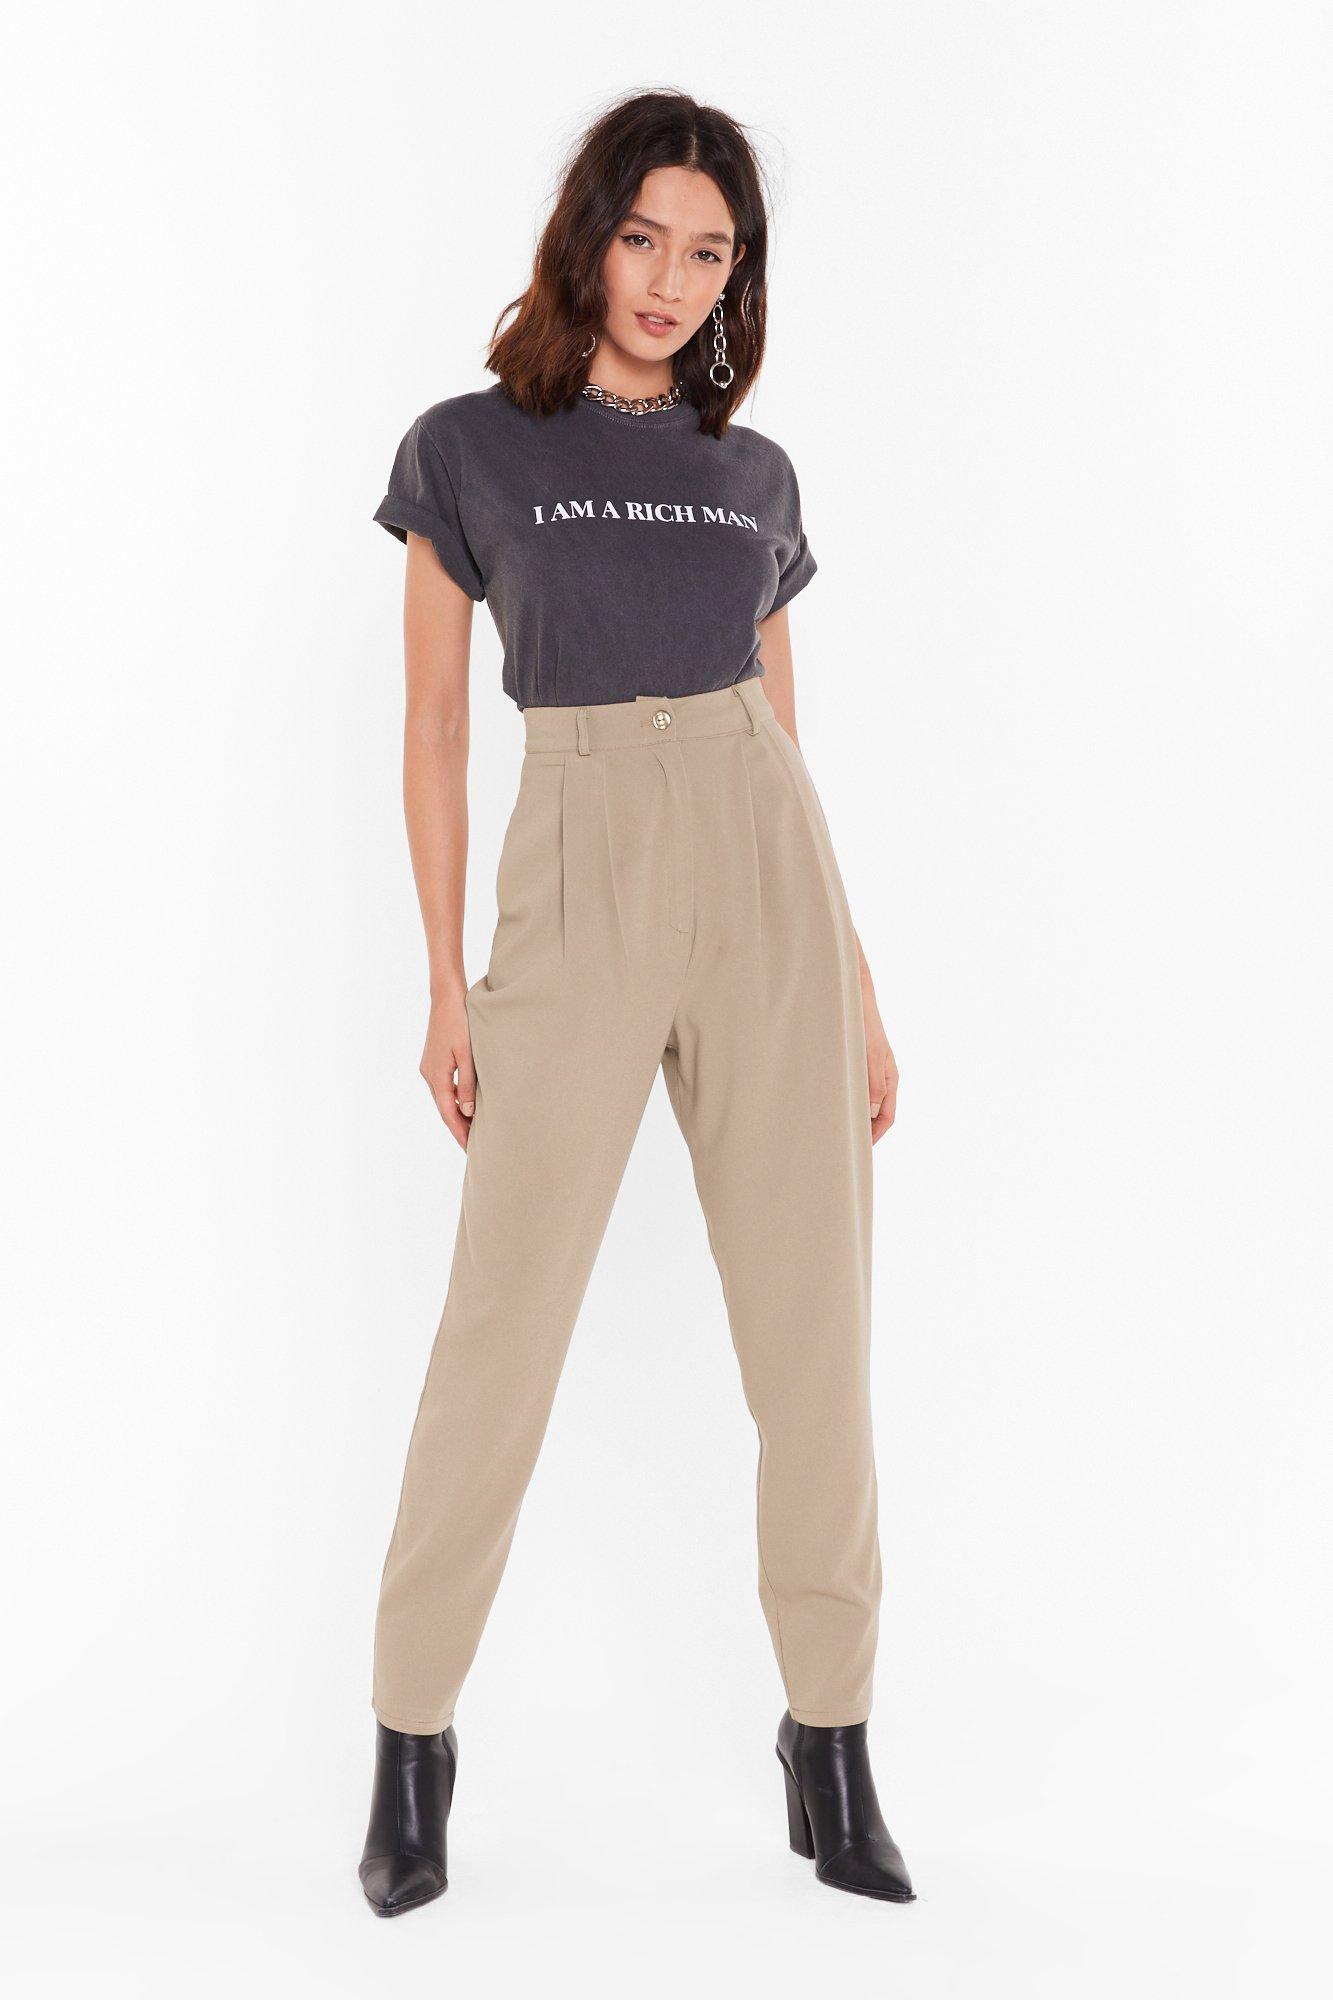 high waisted tapered pants women's